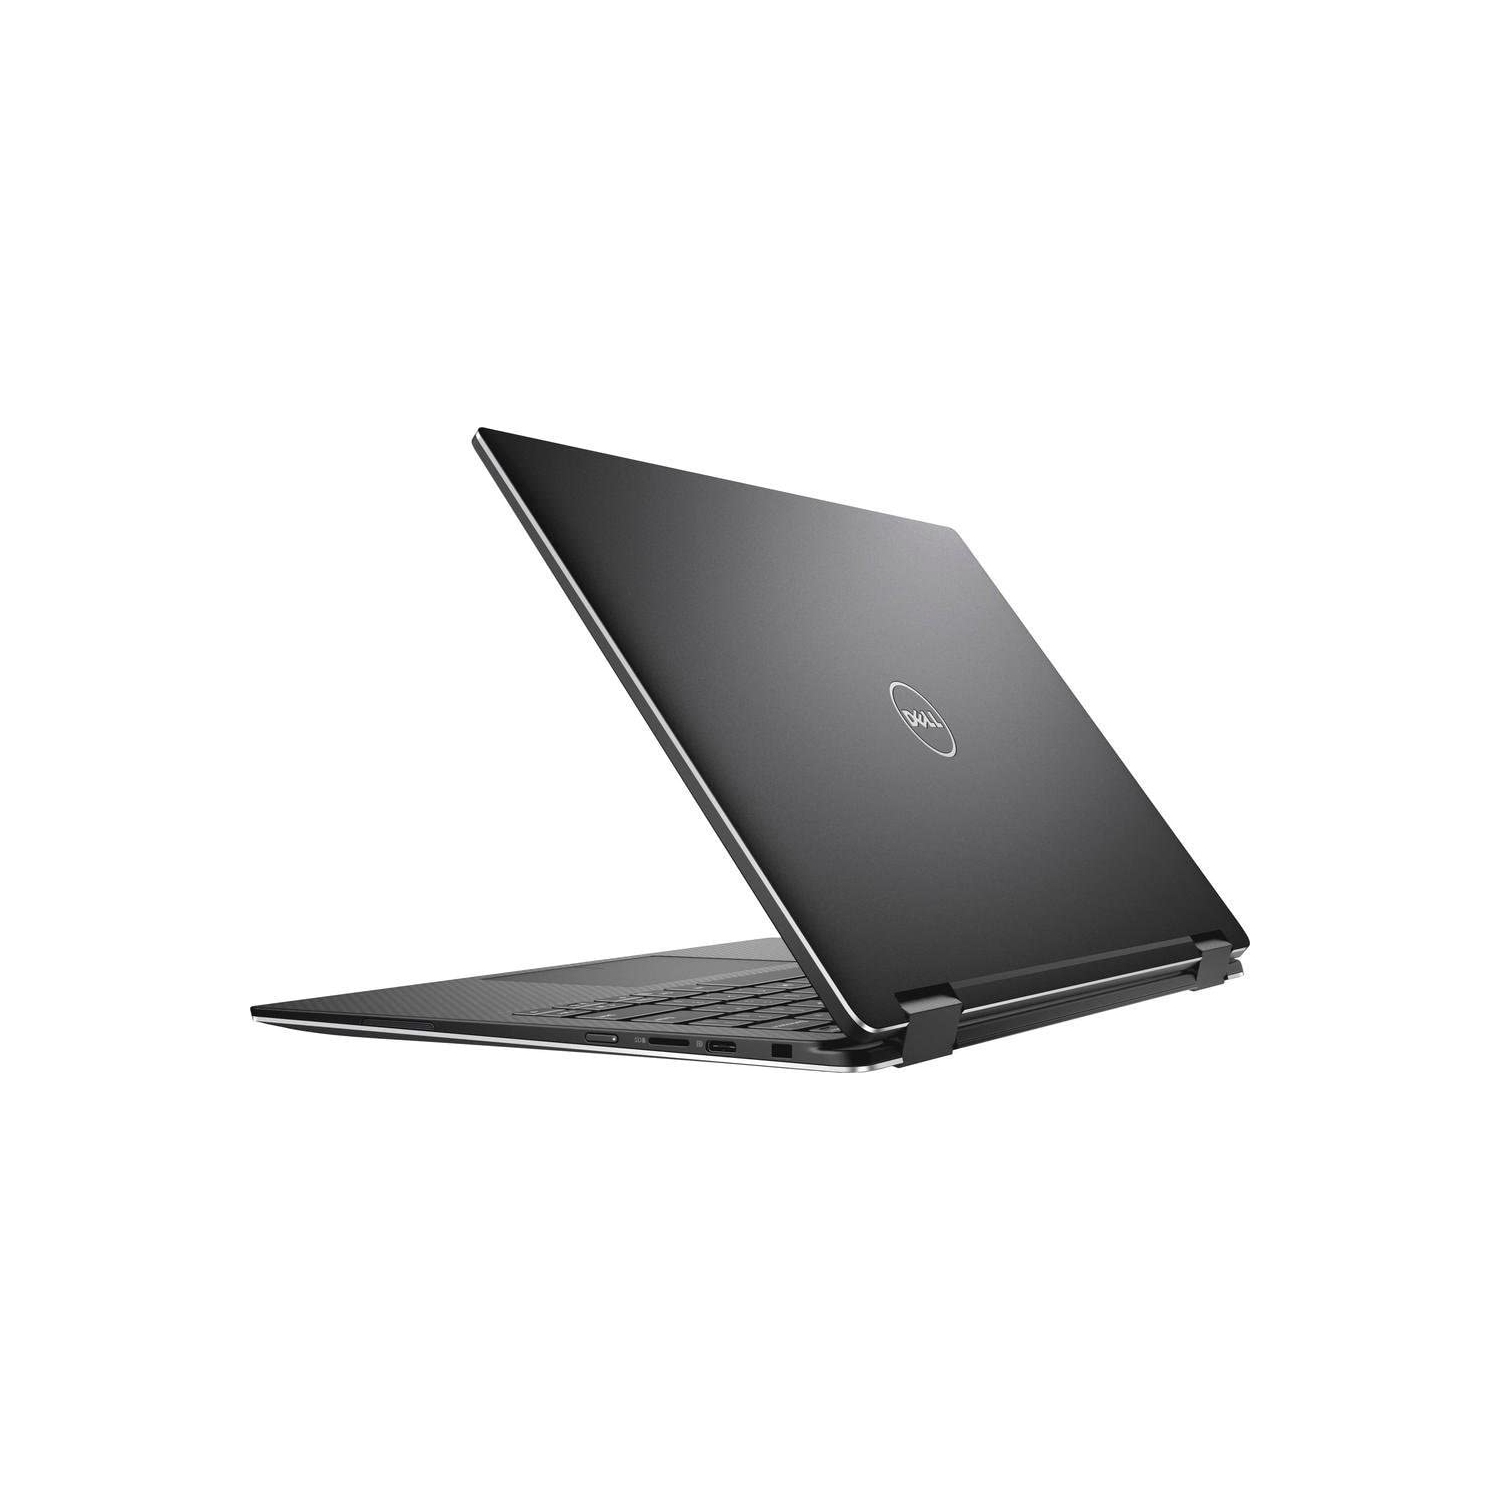 Dell XPS 13 9365 FHD 2-in-1 Touch Screen Laptop - Intel Core i7-7Y75 / 1.30 GHz / 8 GB / 256 GB M.2 SSD / 3200 x 1800 / Win 10 Pro - "Refurbished"